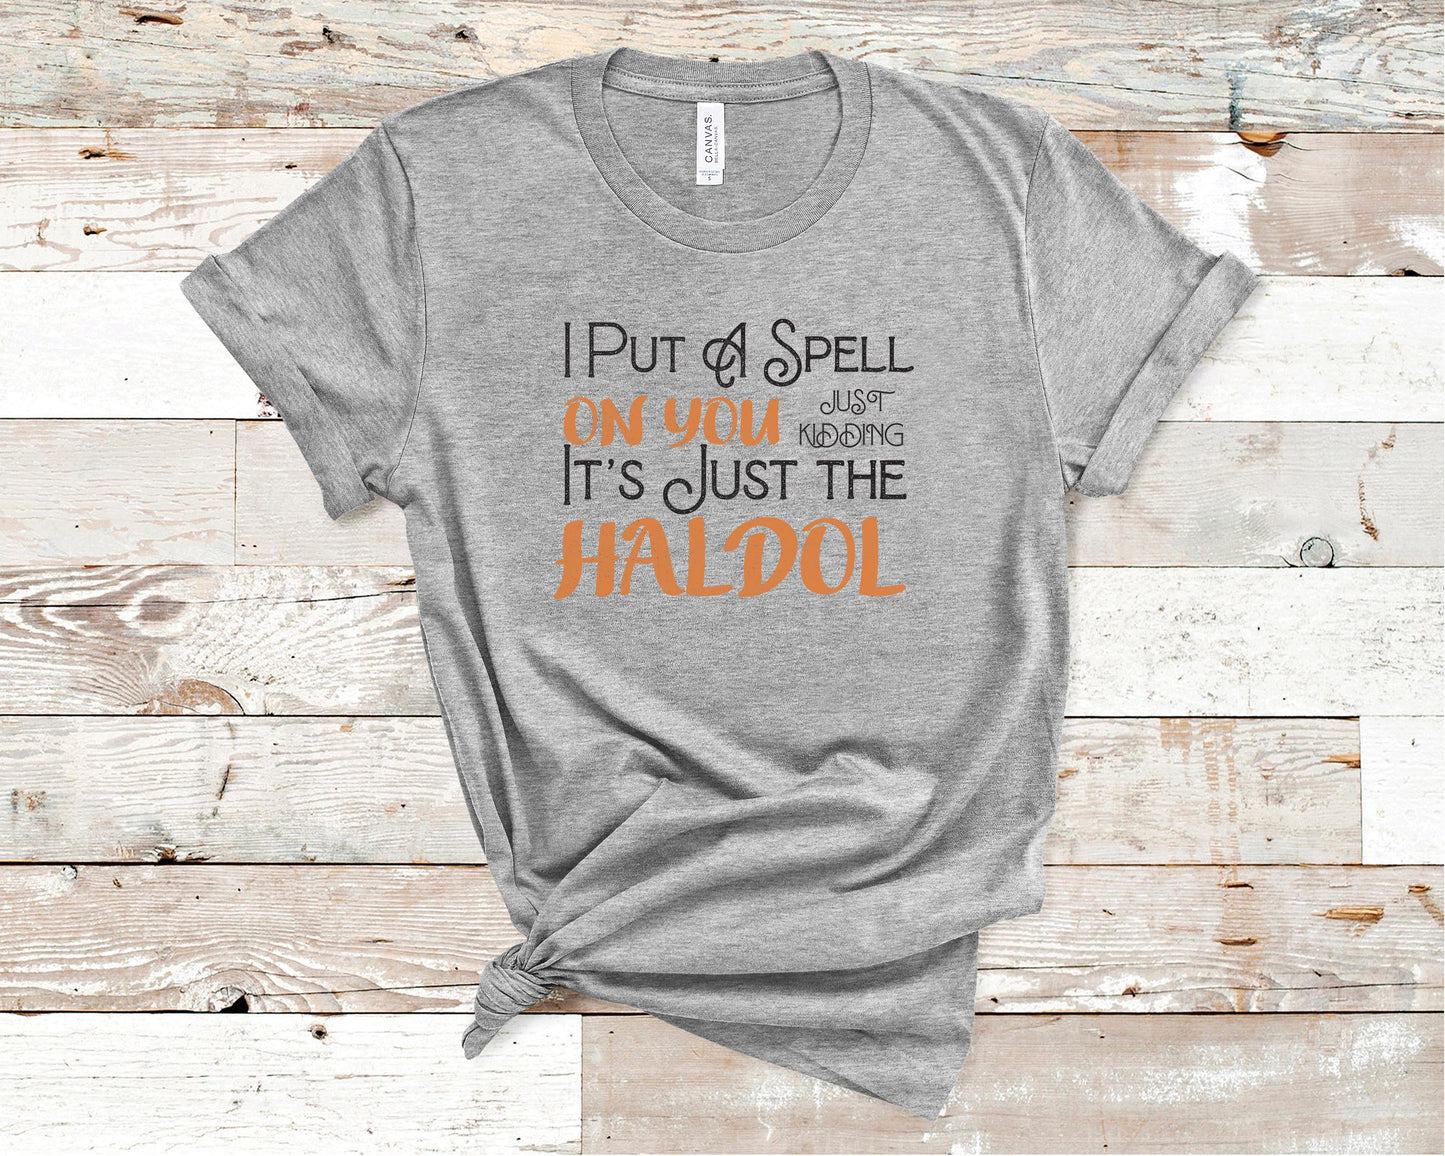 I Put A Spell on You Just Kidding It's Just the Haldol - Healthcare Shirt